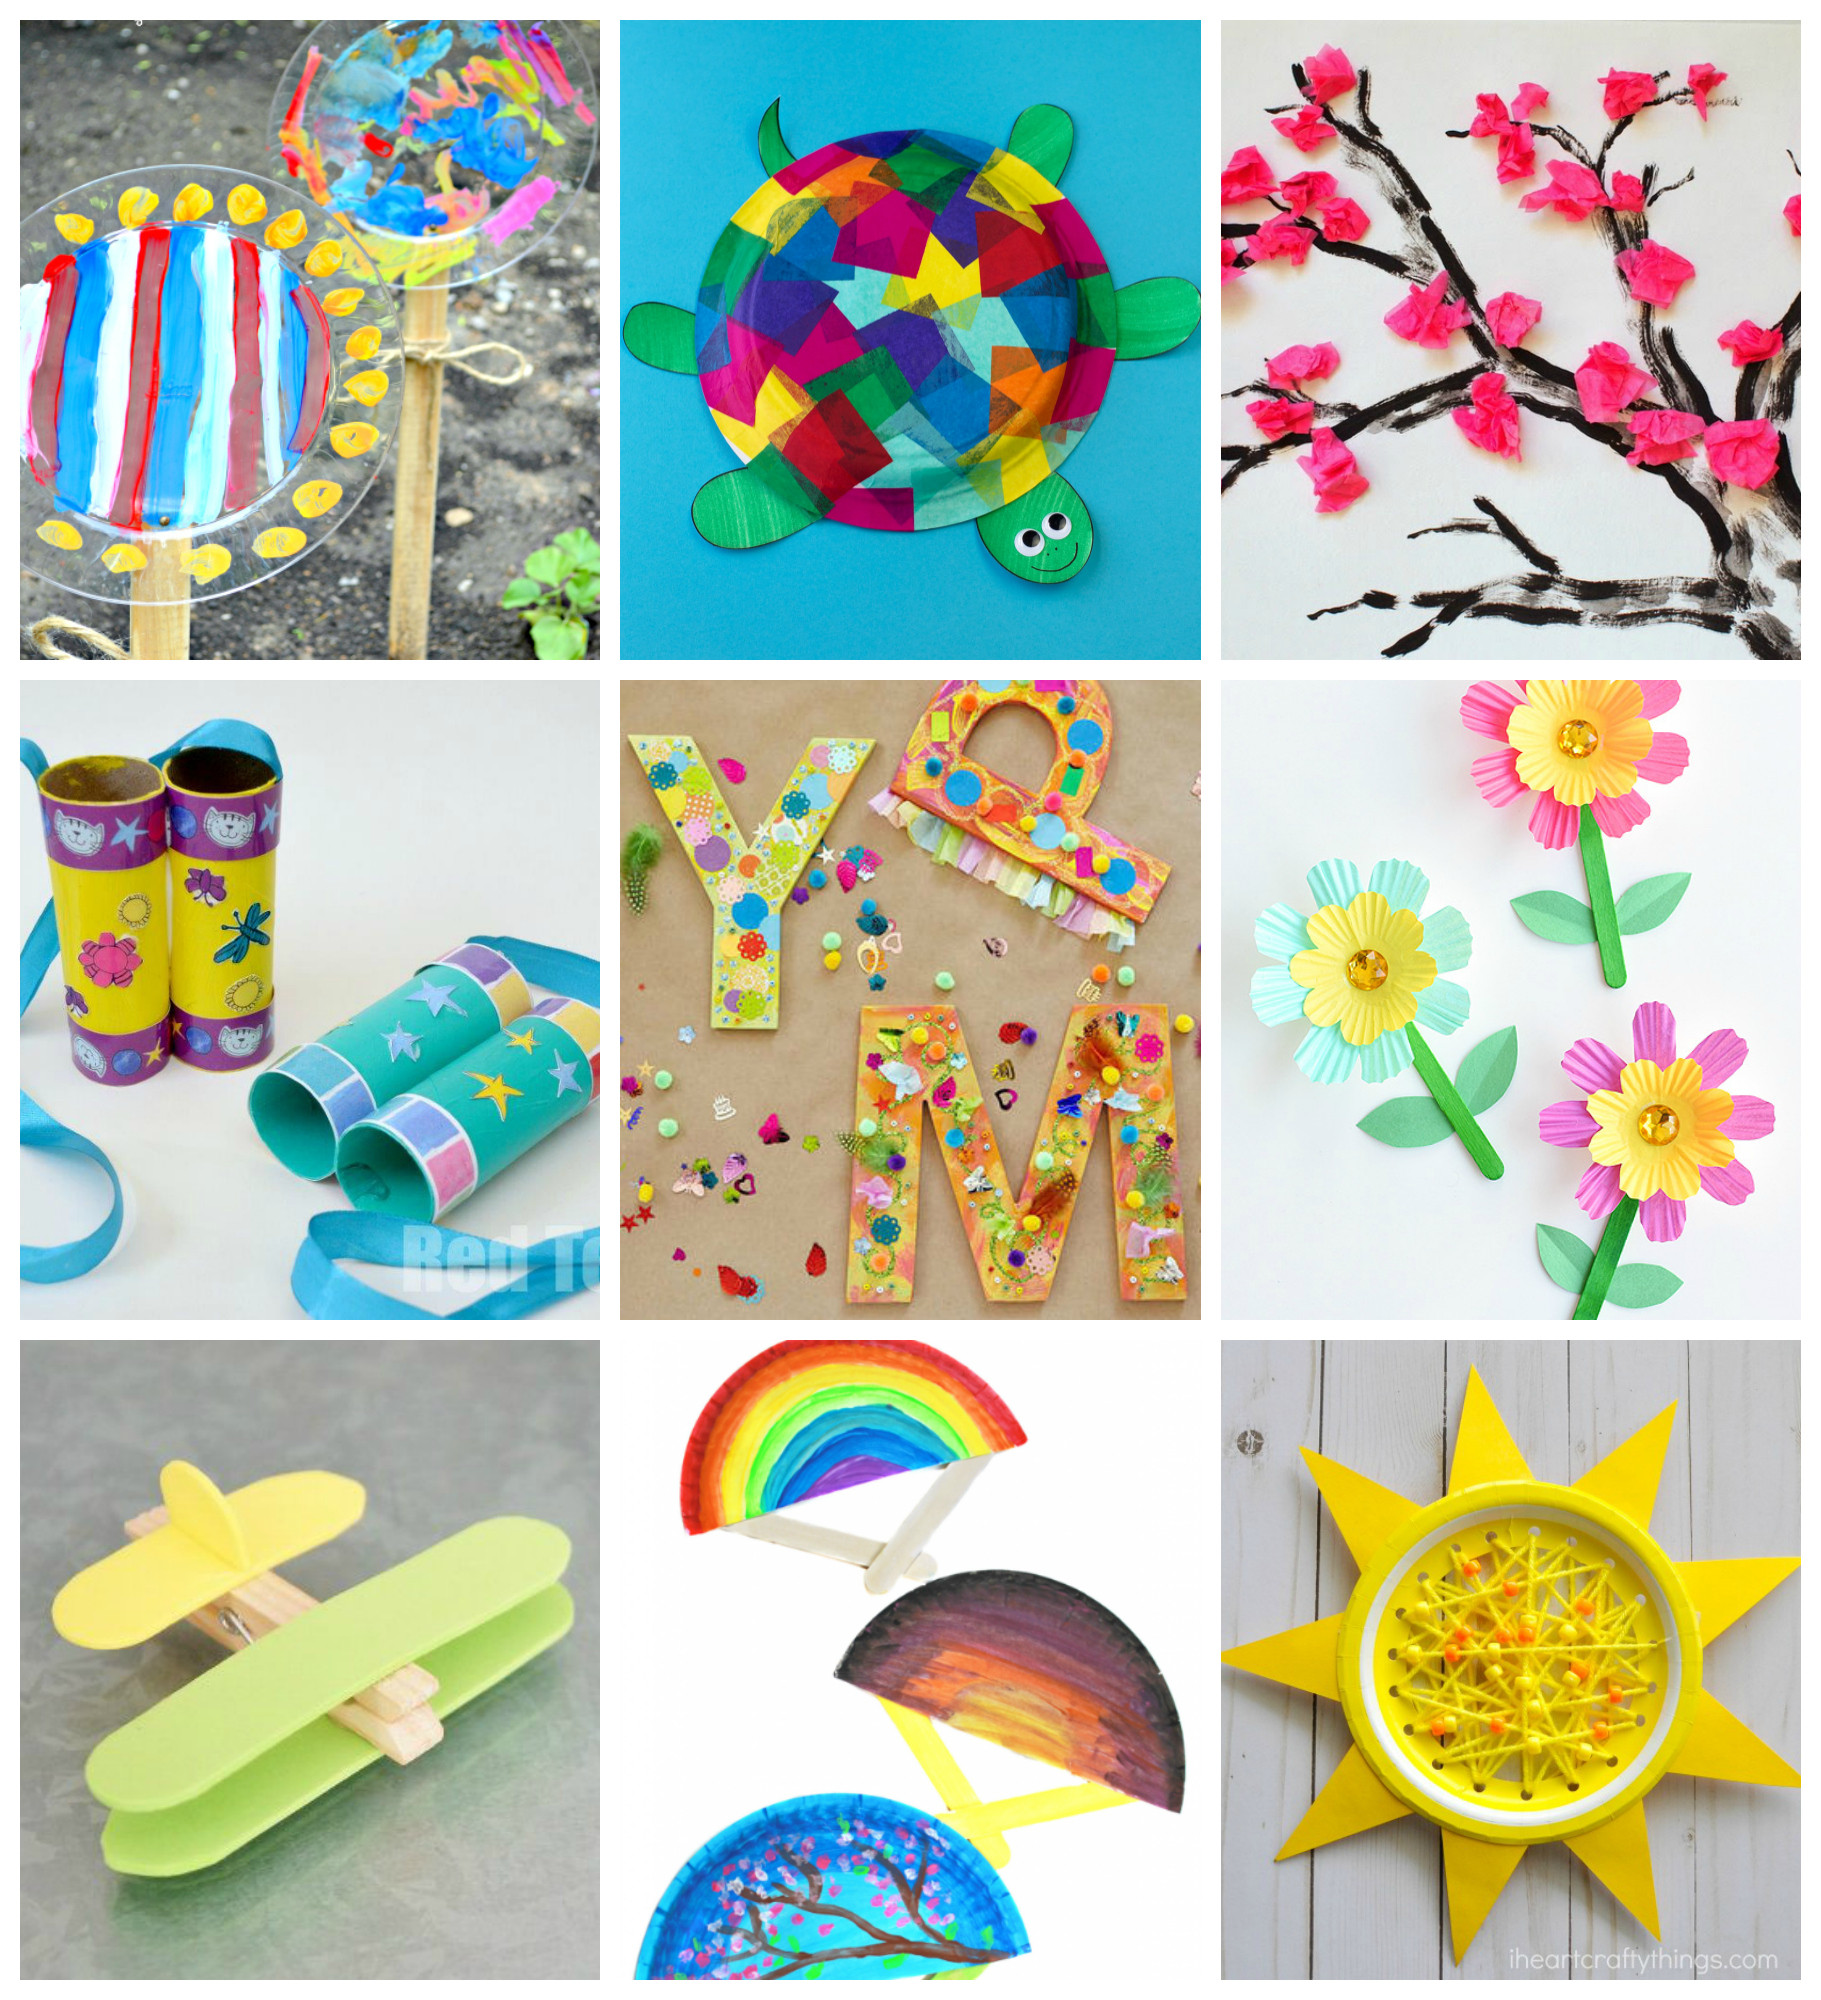 Simple Craft For Preschoolers
 50 Quick & Easy Kids Crafts that ANYONE Can Make